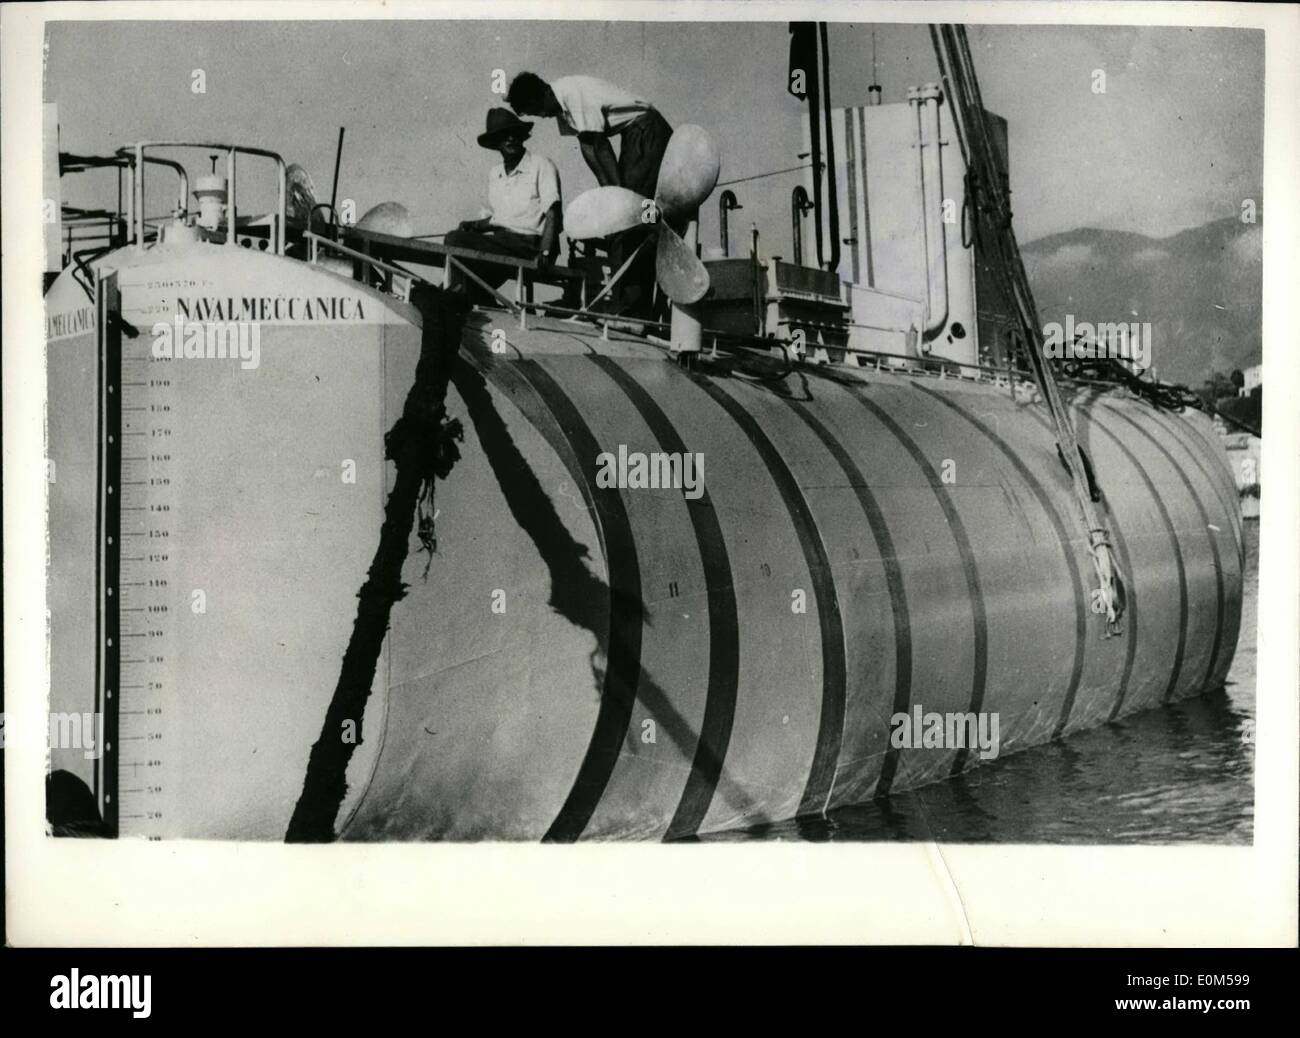 Aug. 08, 1953 - Professor Piccard's ''Bathysphere'' is launched in Italy: Professor Piccard's ''Bathysphere'', the vessel in which he hopes to explore the depths of the Tyrrhenean sea, and set up a record dive of 13,000-ft., was launched at Castellamare di Stabia, Italy. The vessel consists of two main parts - a cigar-shaped structure of watertight co mpartaments which will house the special liquid which will be used for surfacing, and a lower part which is the actual sphere from which observations will be made Stock Photo